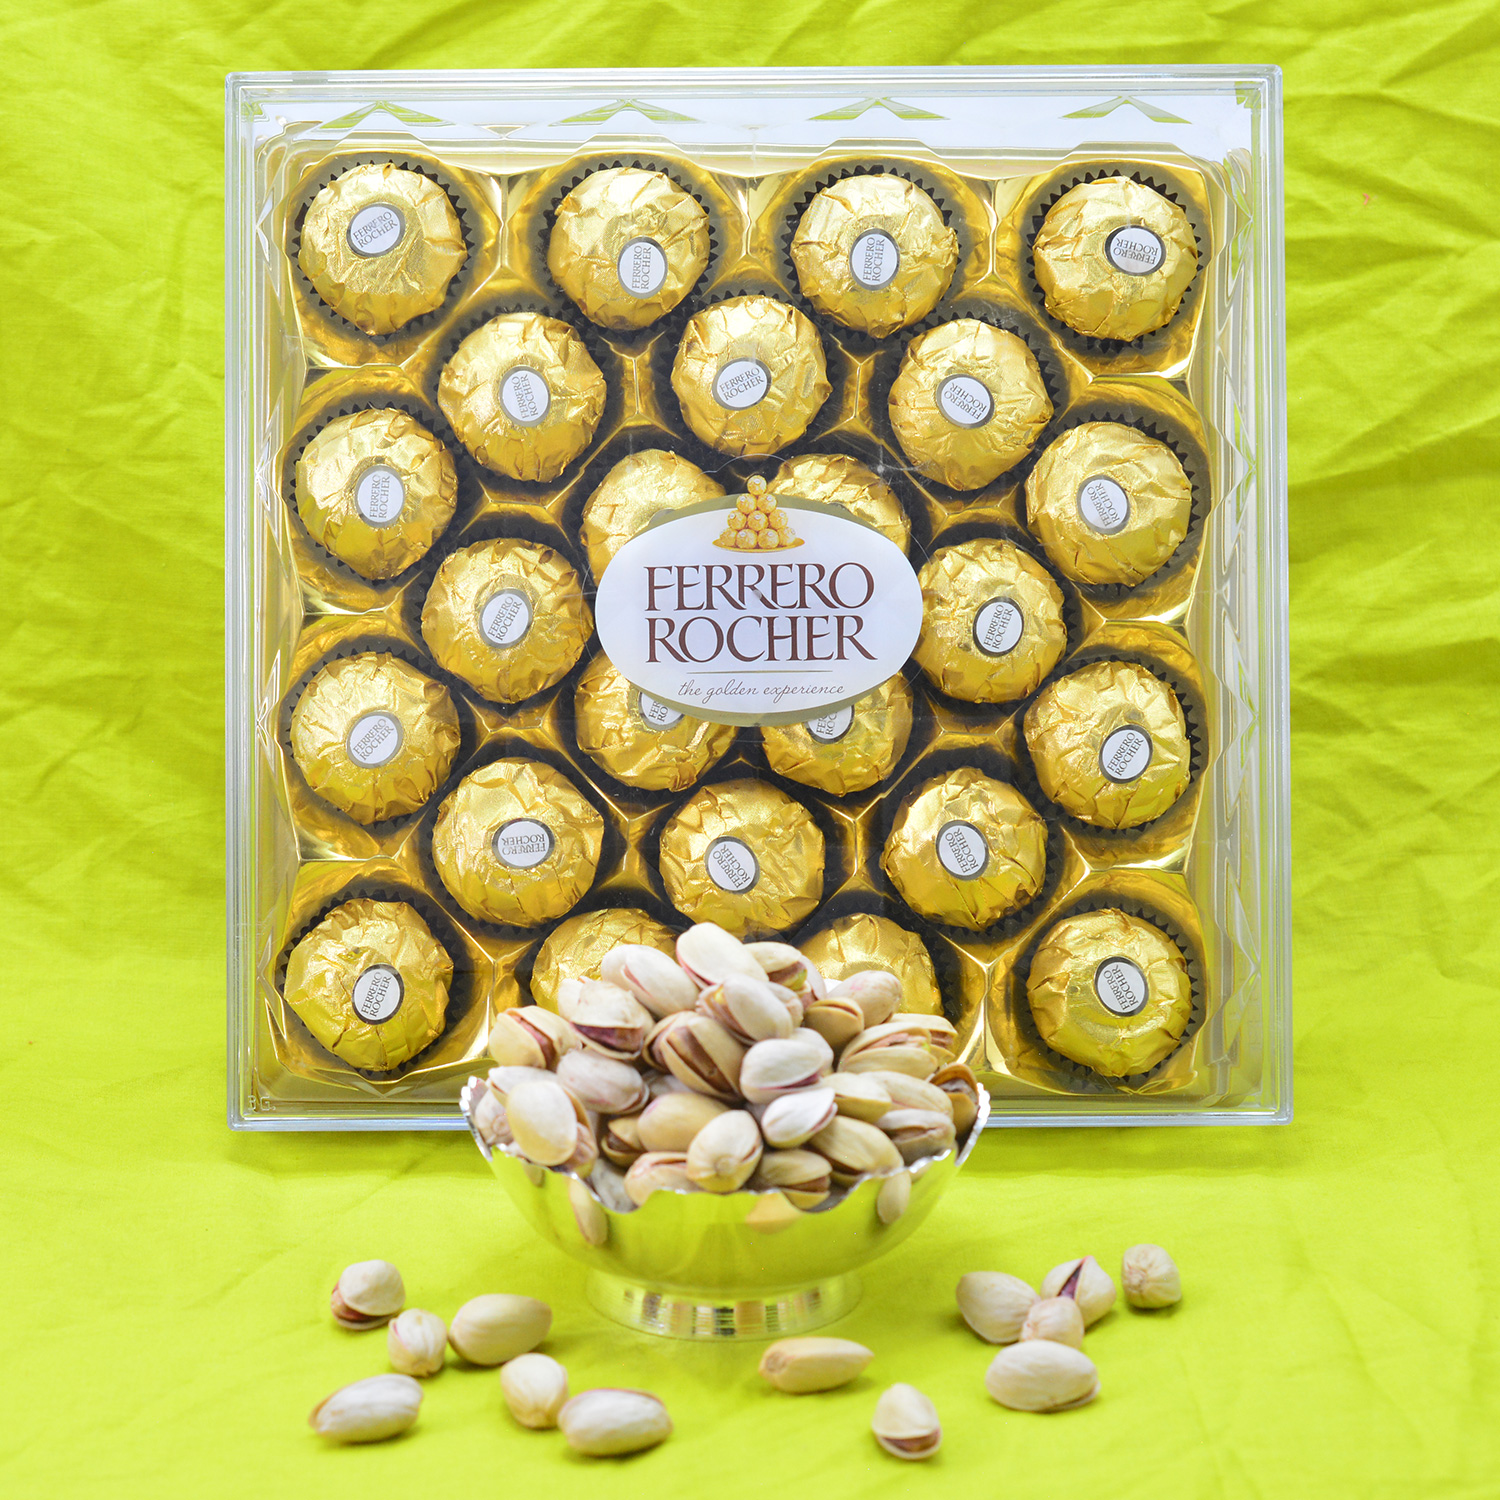 24 Pc Ferrero Rocher Chocolate along with Tasty Roasted Pistachios Dry Fruit Hamper